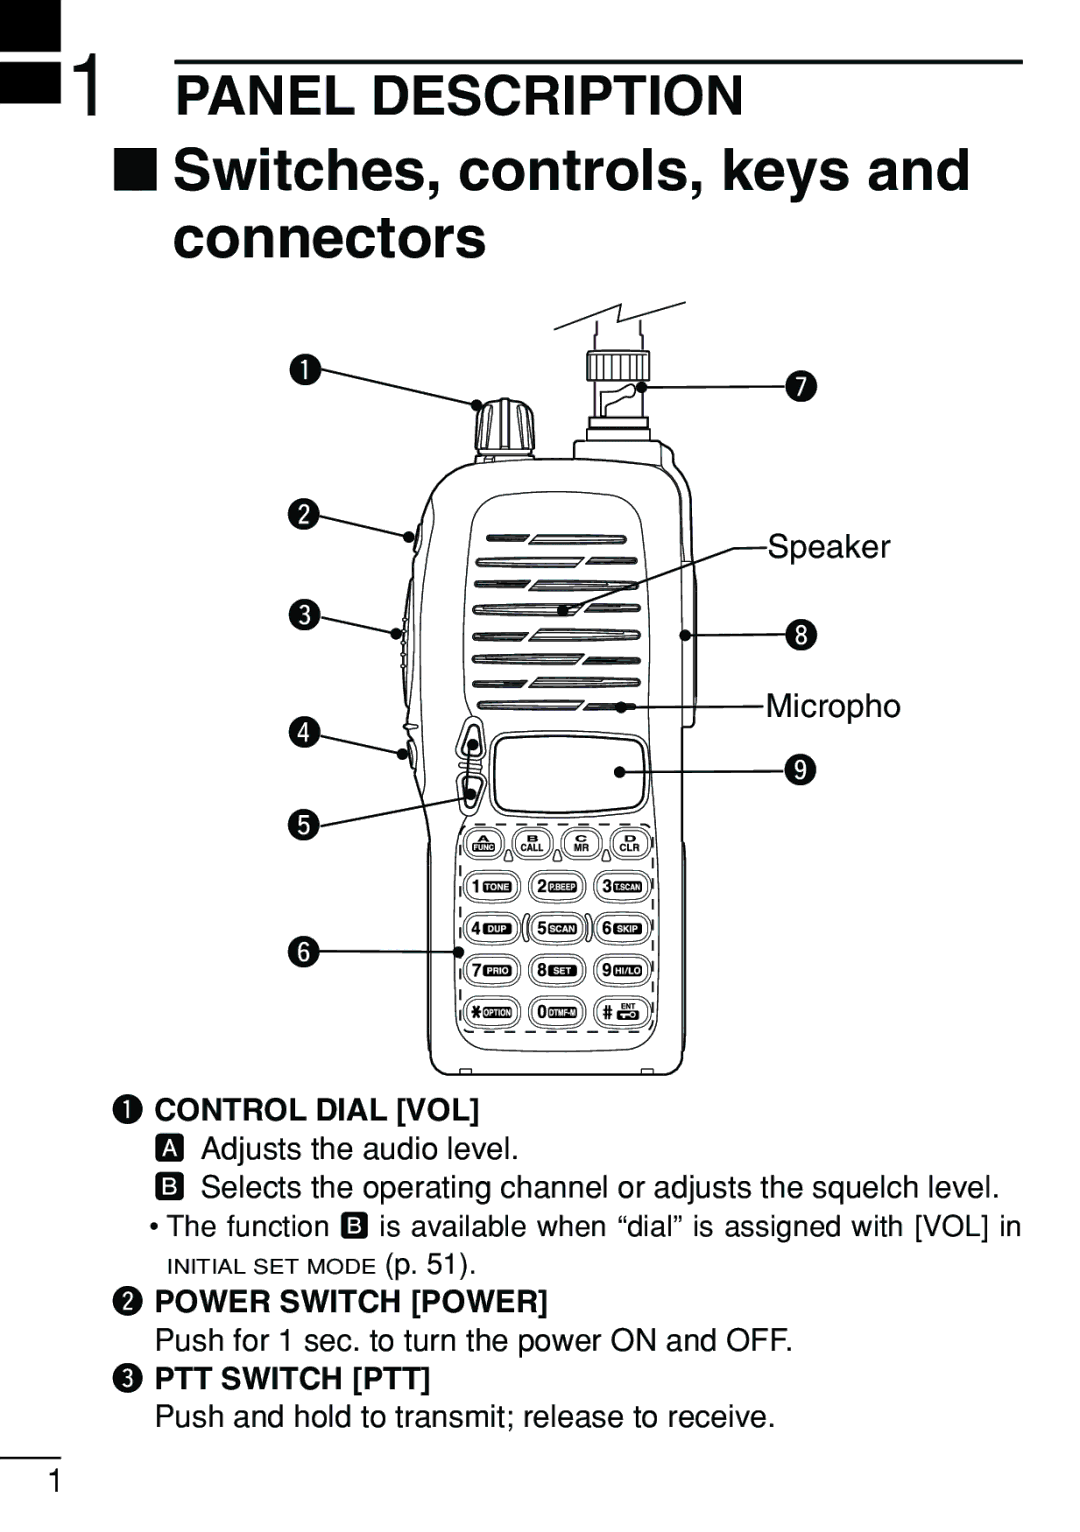 Icom IC-V8 ‘ Switches, controls, keys and connectors, Micropho, Control Dial VOL, Power Switch Power, PTT Switch PTT 